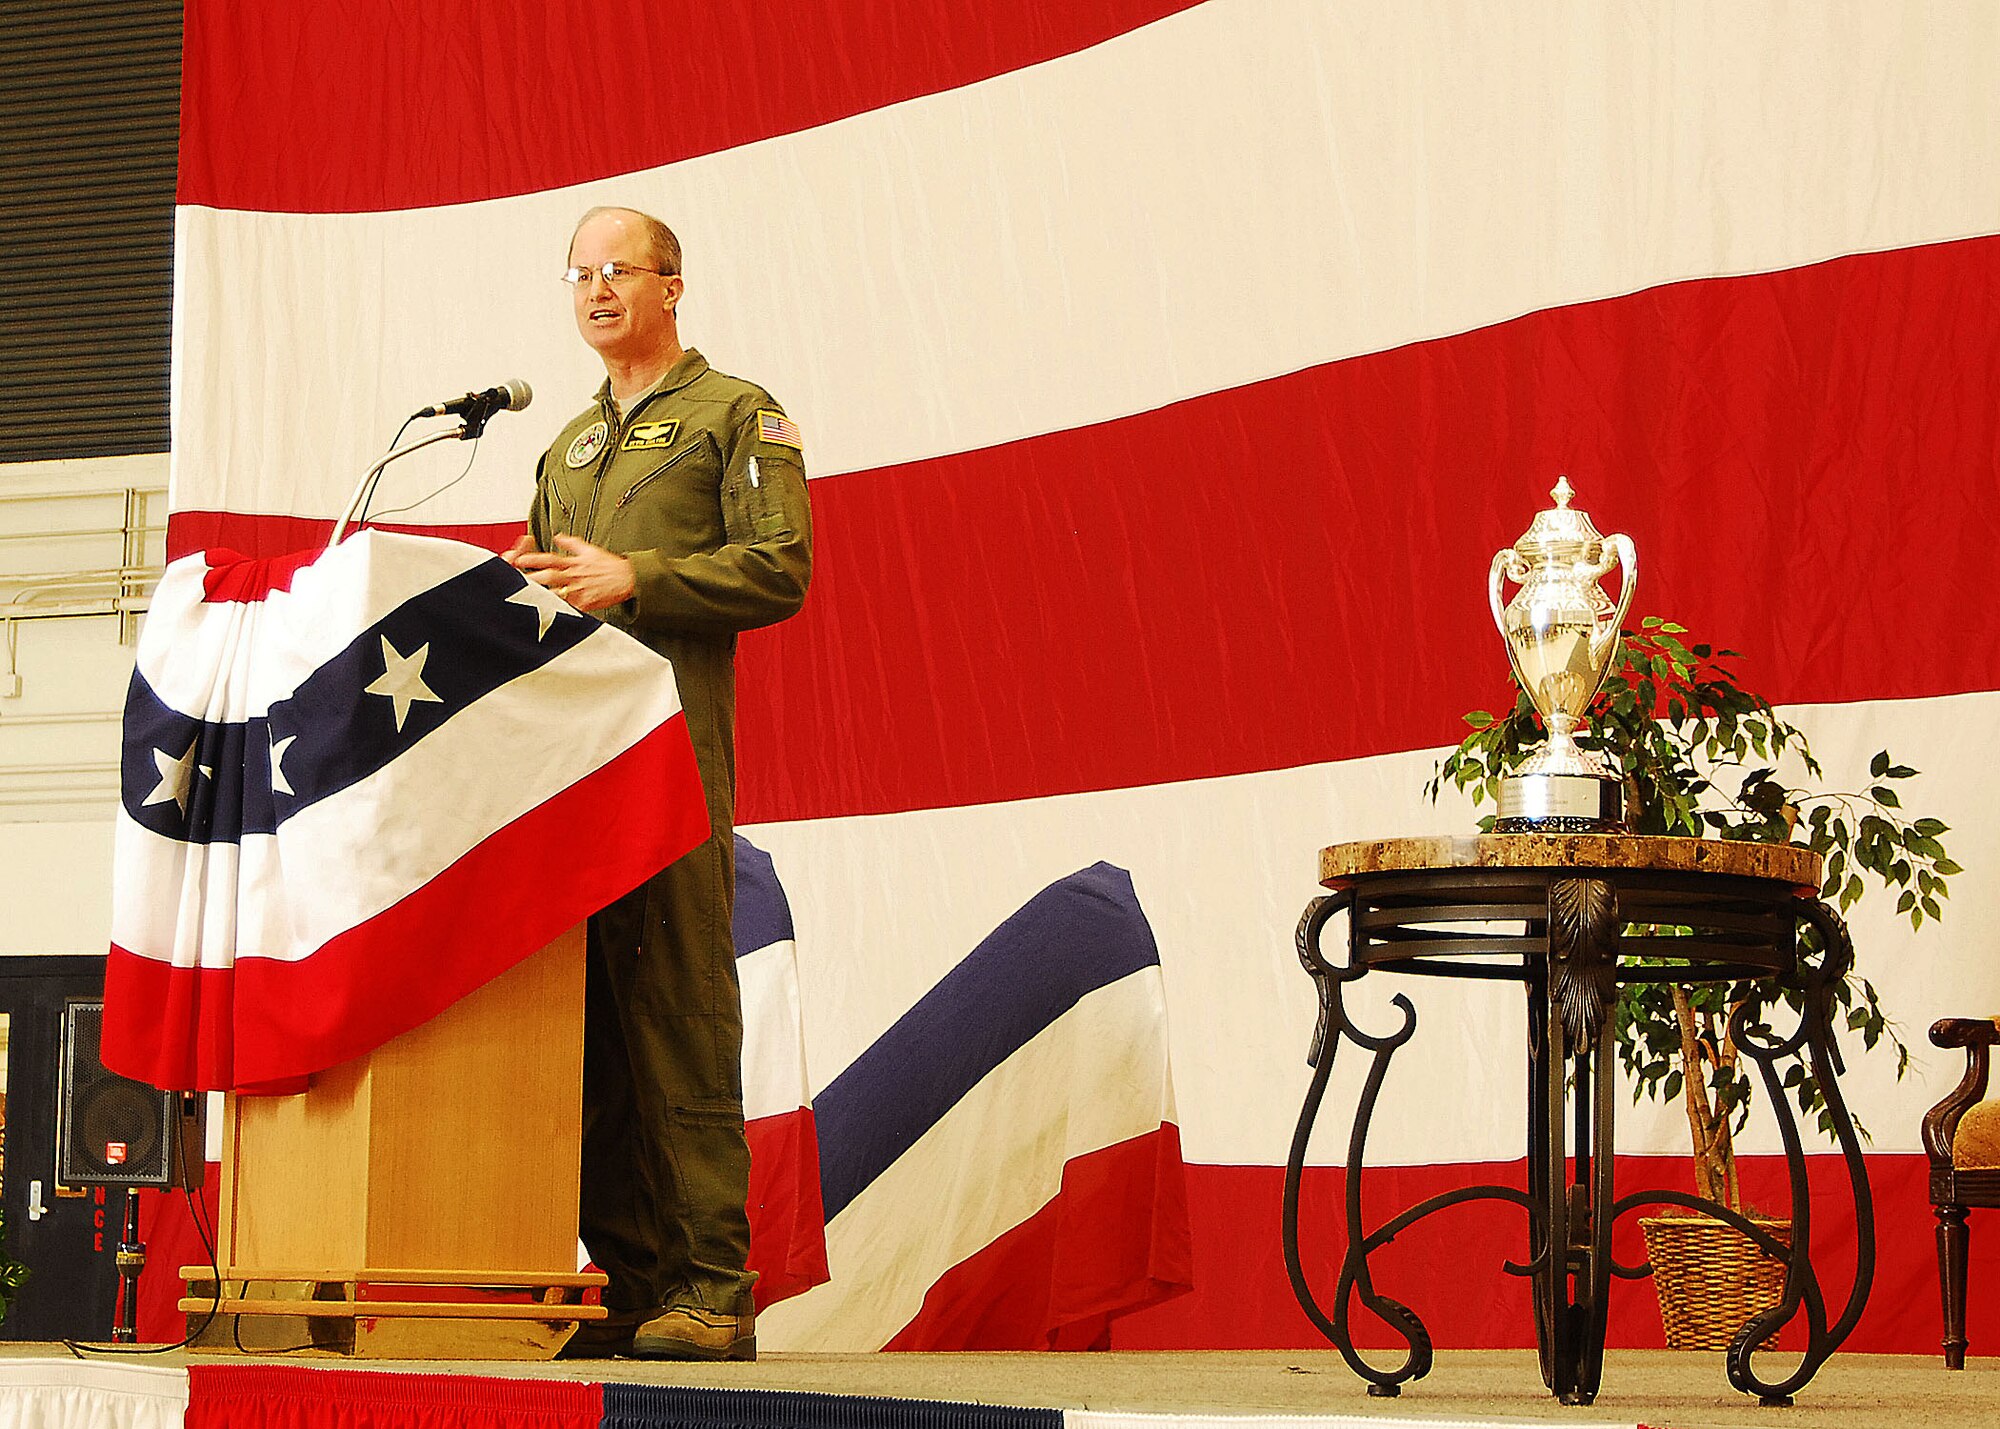 Gen. Kevin Chilton, commander of U.S. Strategic Command, speaks to TACAMO Sailors before the presentation of the 2008 Omaha Trophy for the category of Strategic Aircraft Operations. (Navy photo by Petty Offficer 2nd Class Jessica Vargas)